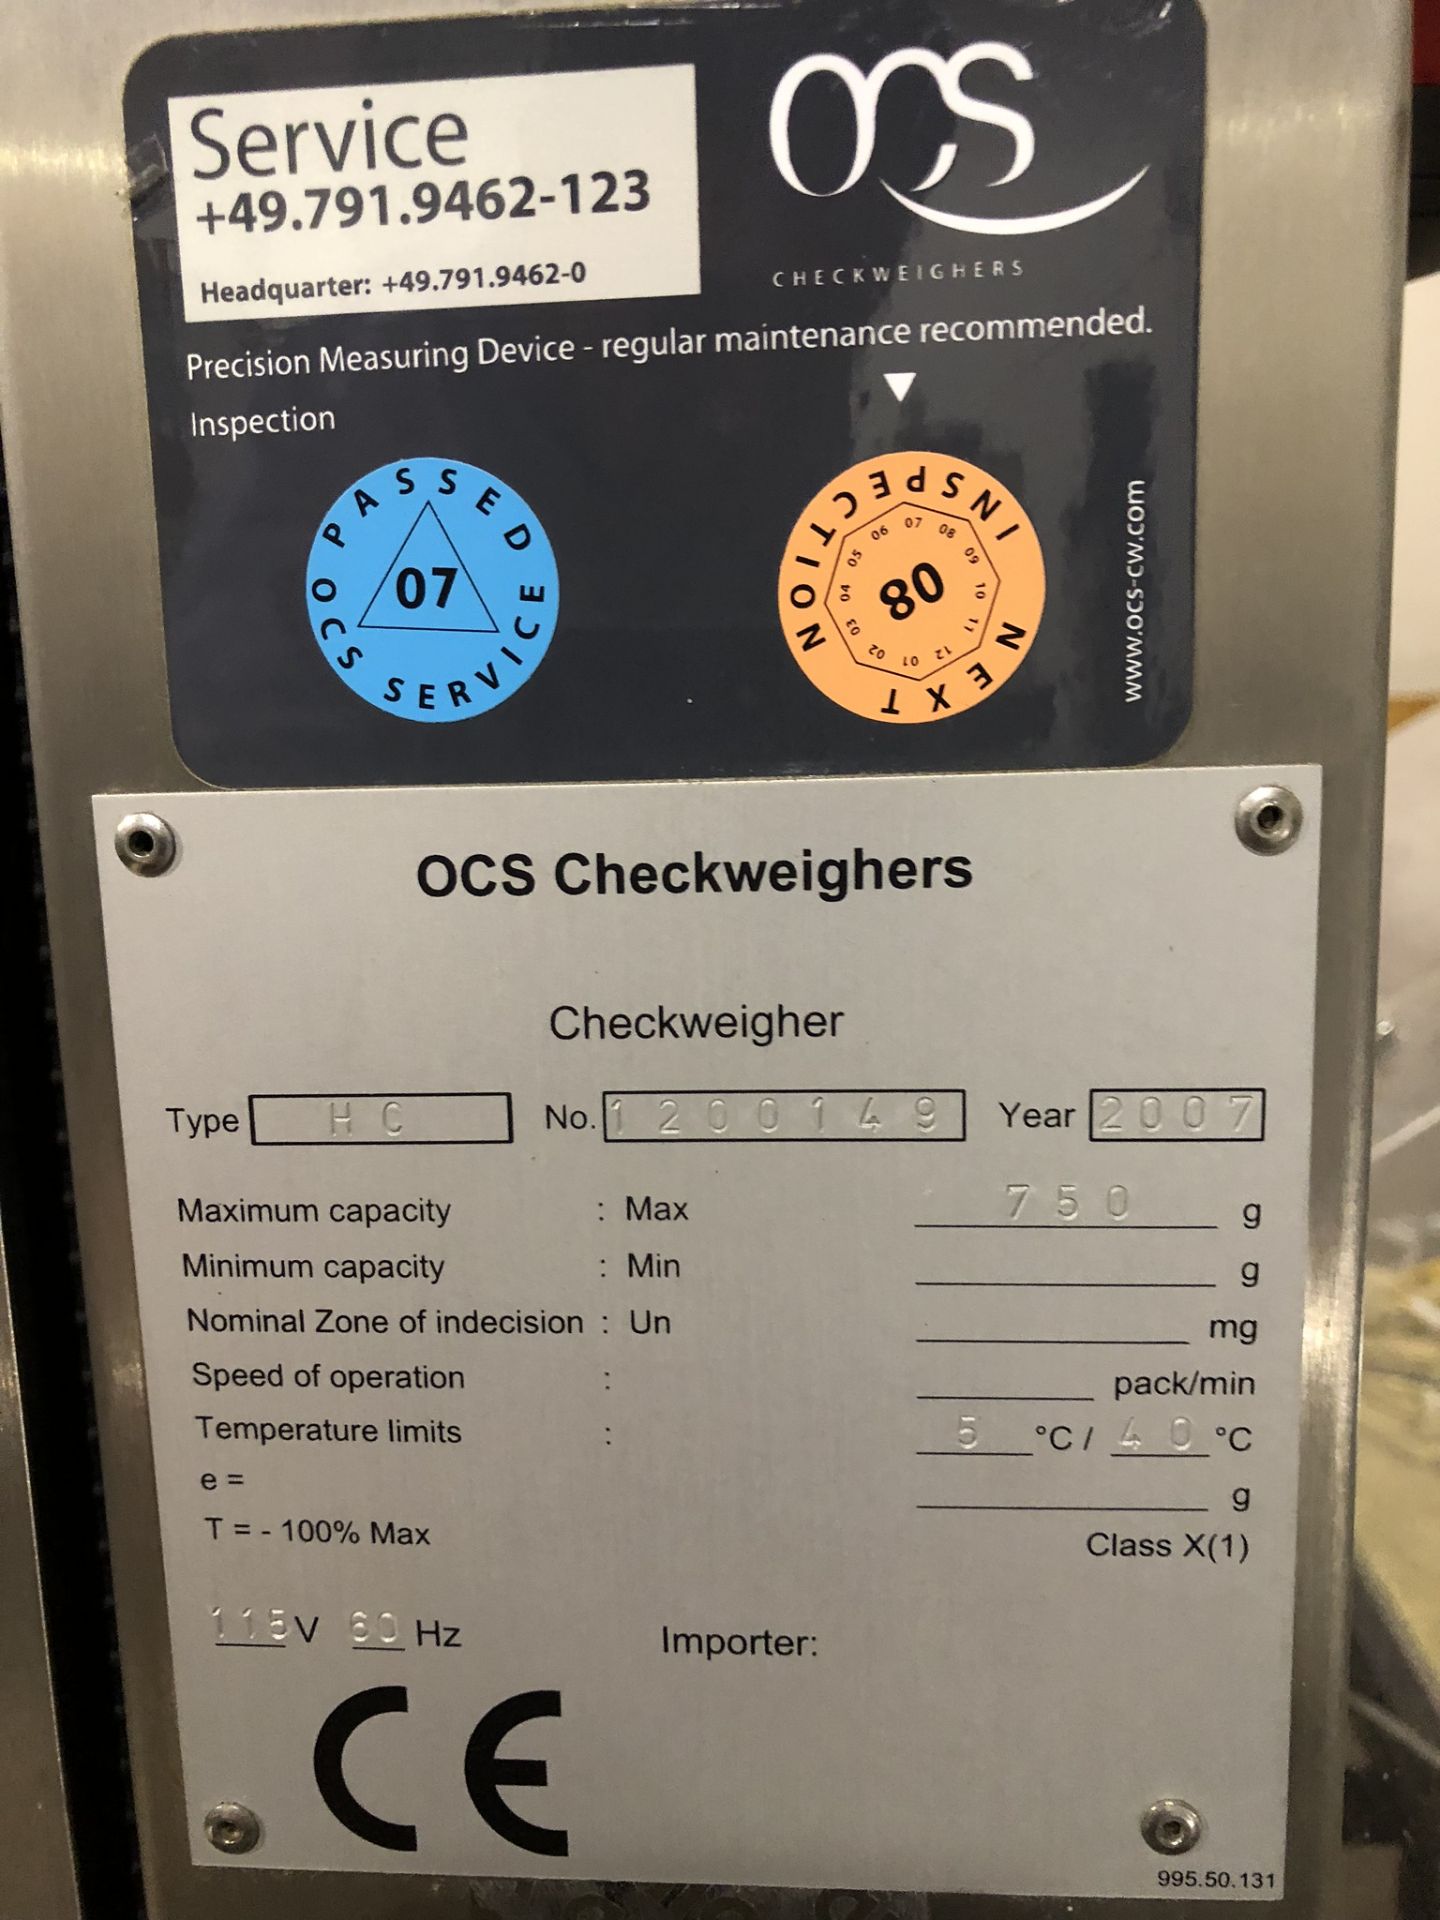 Checkweigher - Image 7 of 9